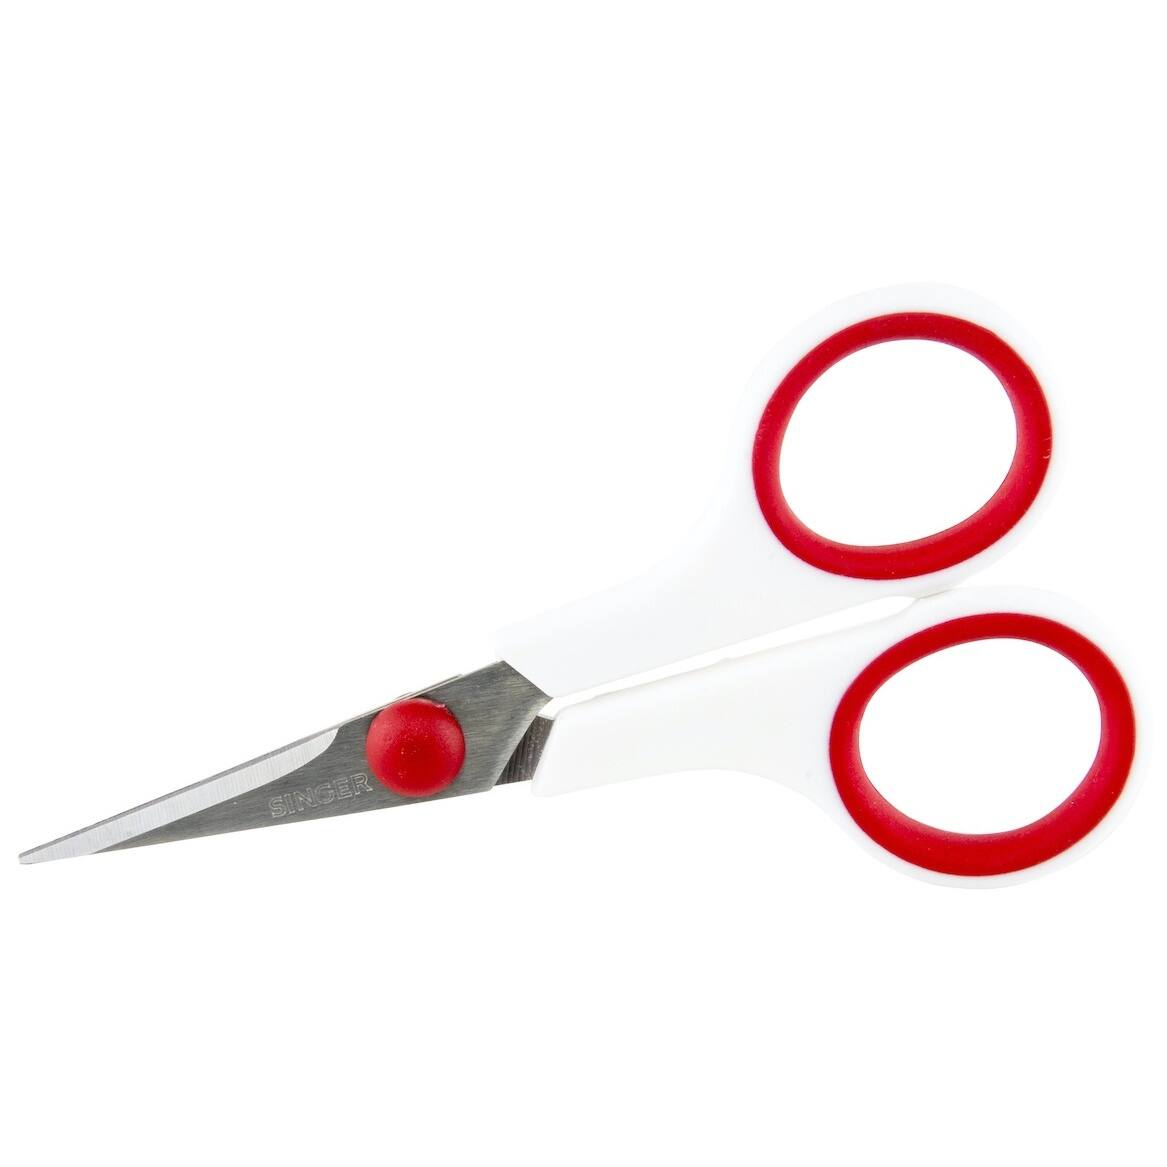 SINGER® 8.5 Sewing Scissors With Comfort Grip, Michaels